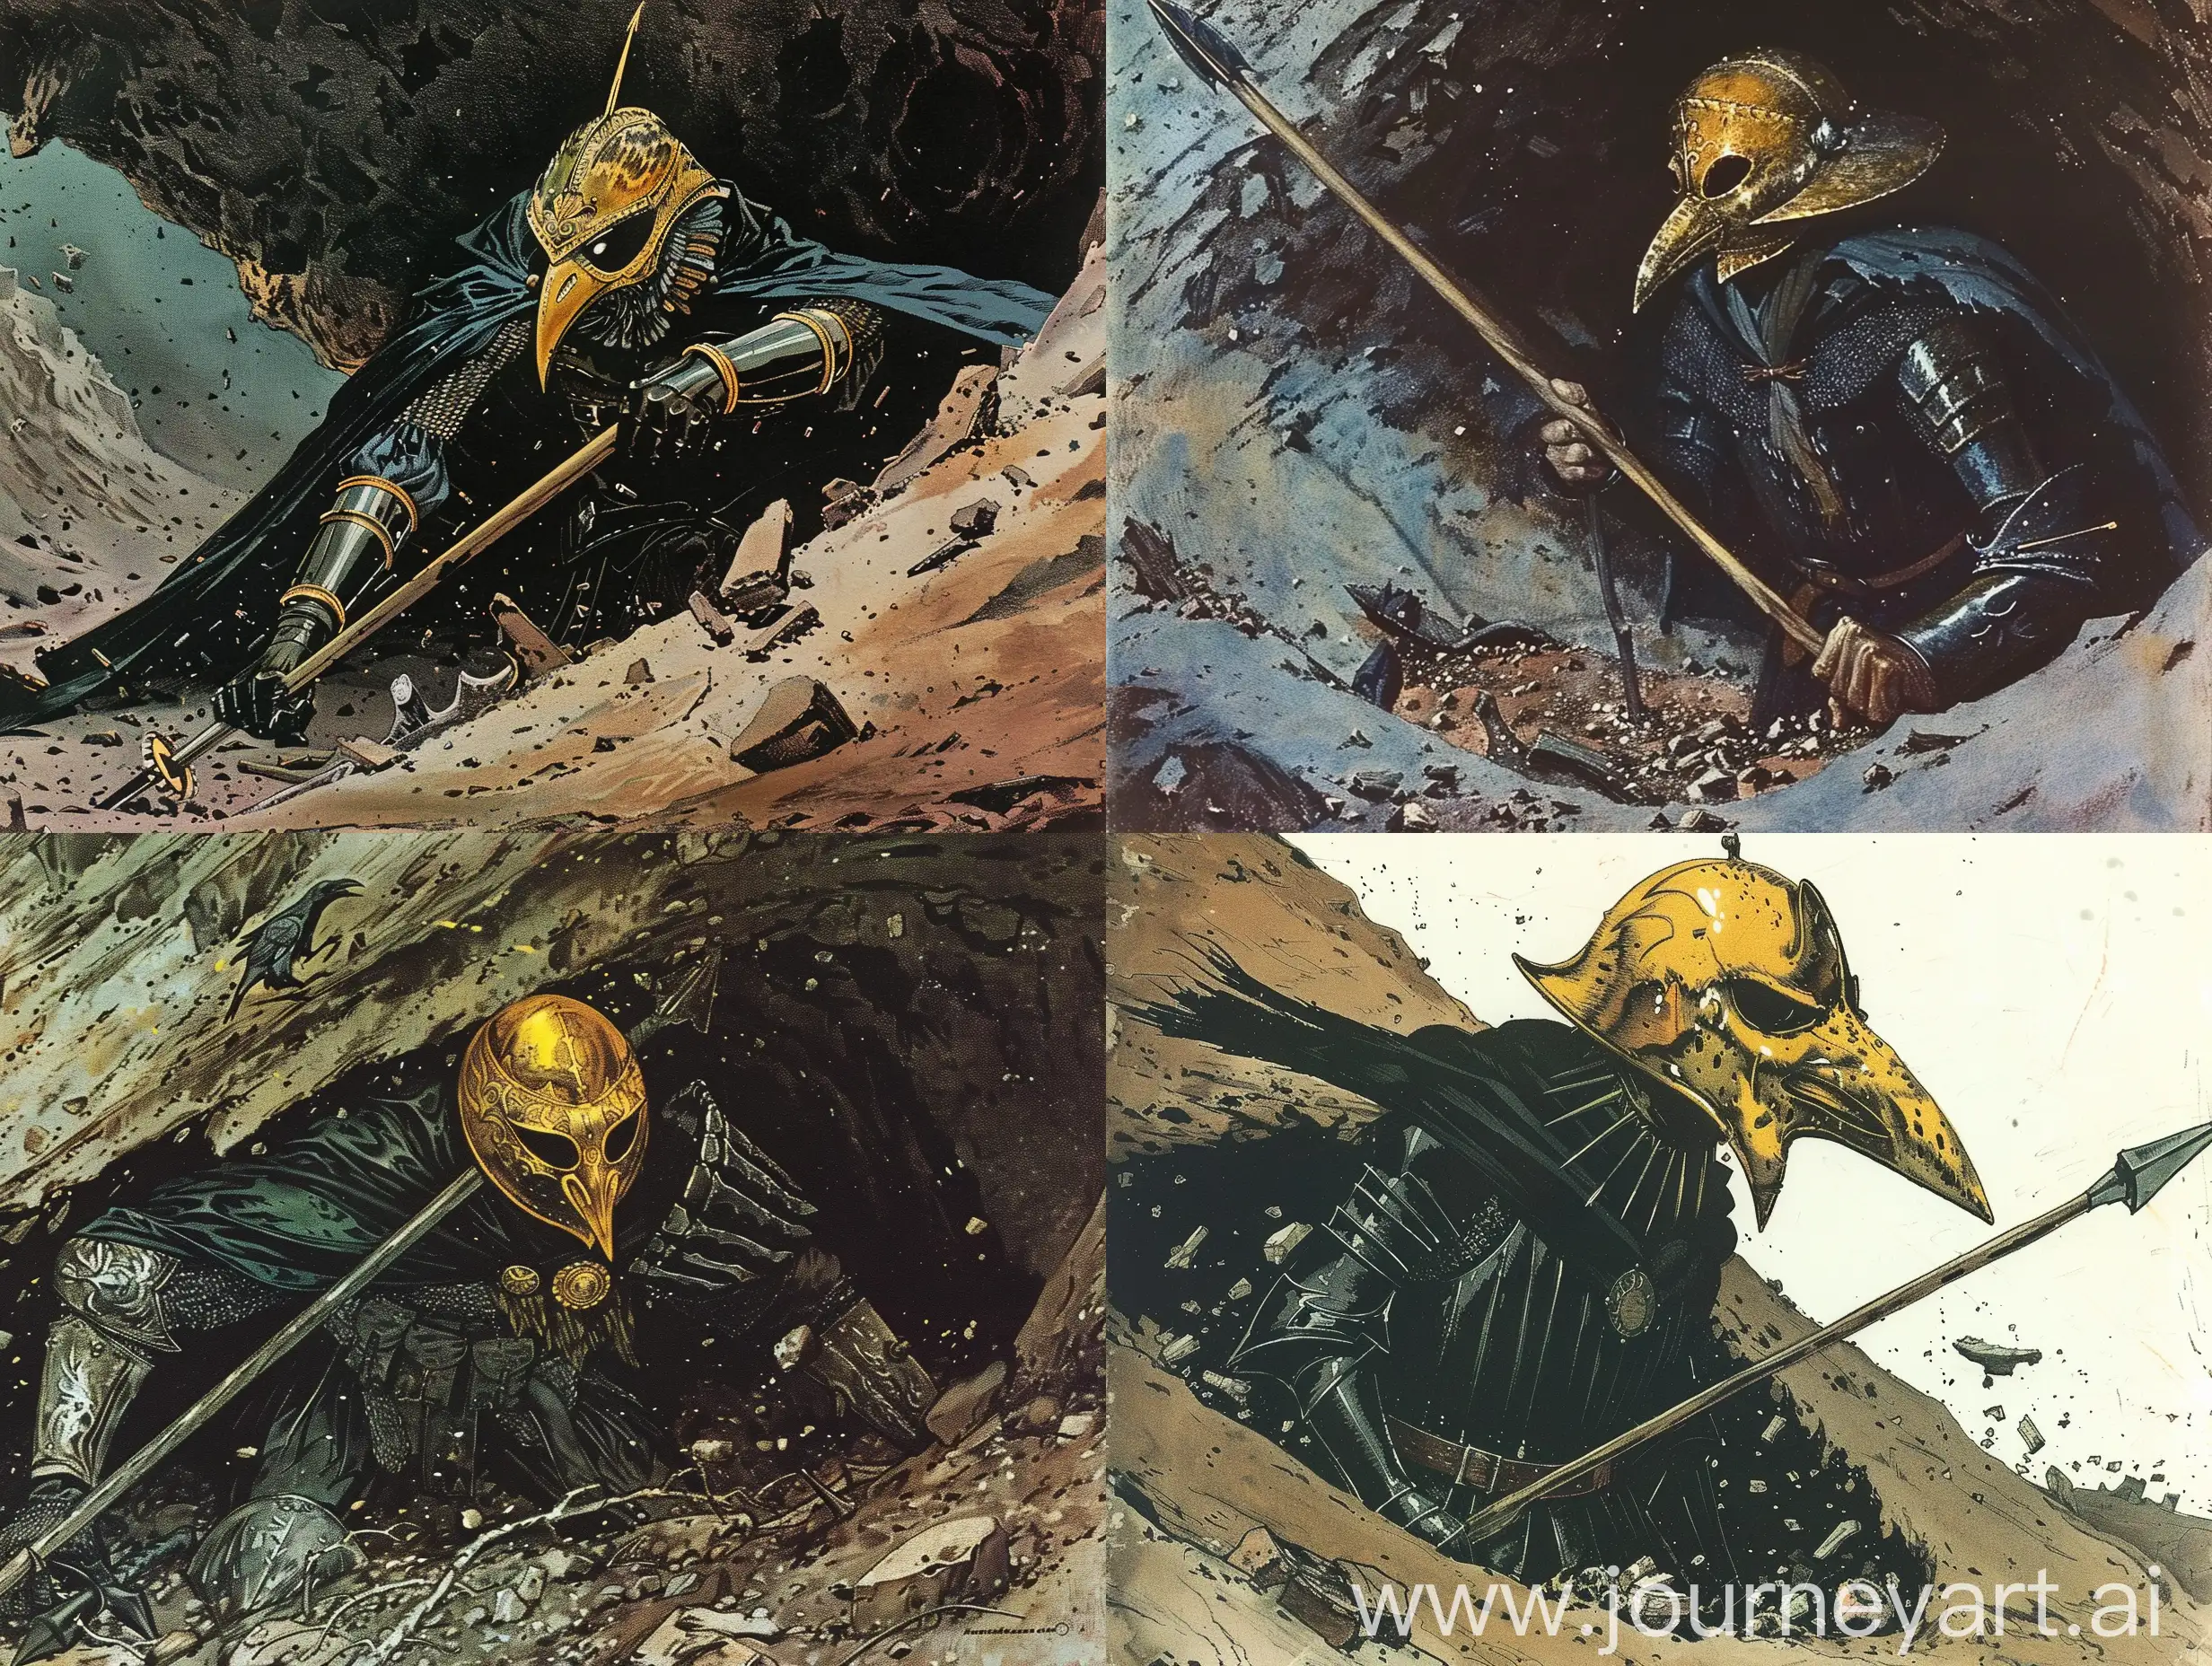 1970's dark fantasy book illustration. Scene of a knight who wears a golden mask in the shape of a raven, and has armor black as night. He is under a hill, holding a spear. The bottom is full of debris.